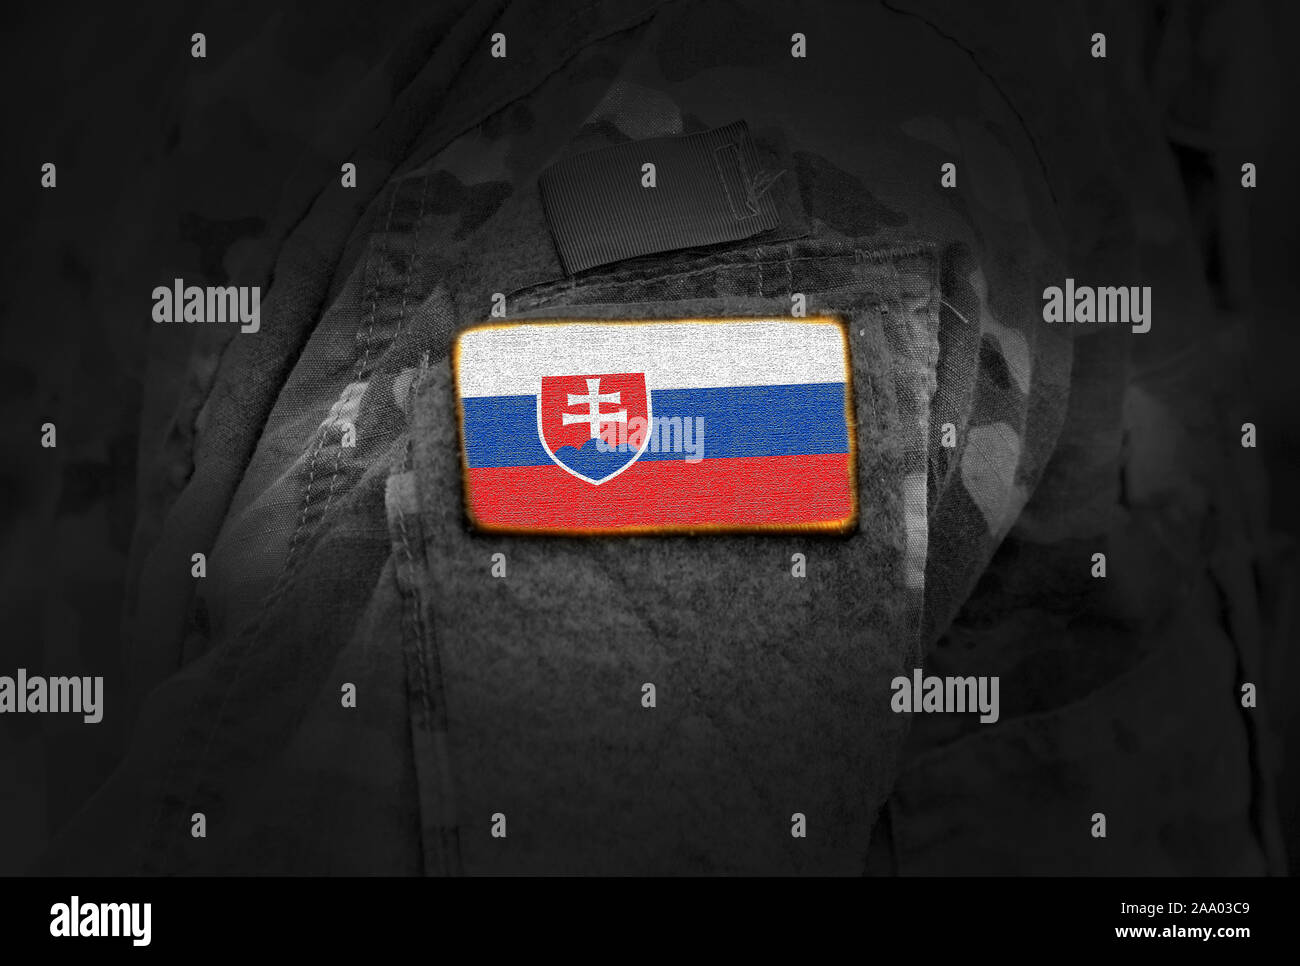 Flag of Slovakia on military uniform. Army, armed forces, soldiers. Collage. Stock Photo